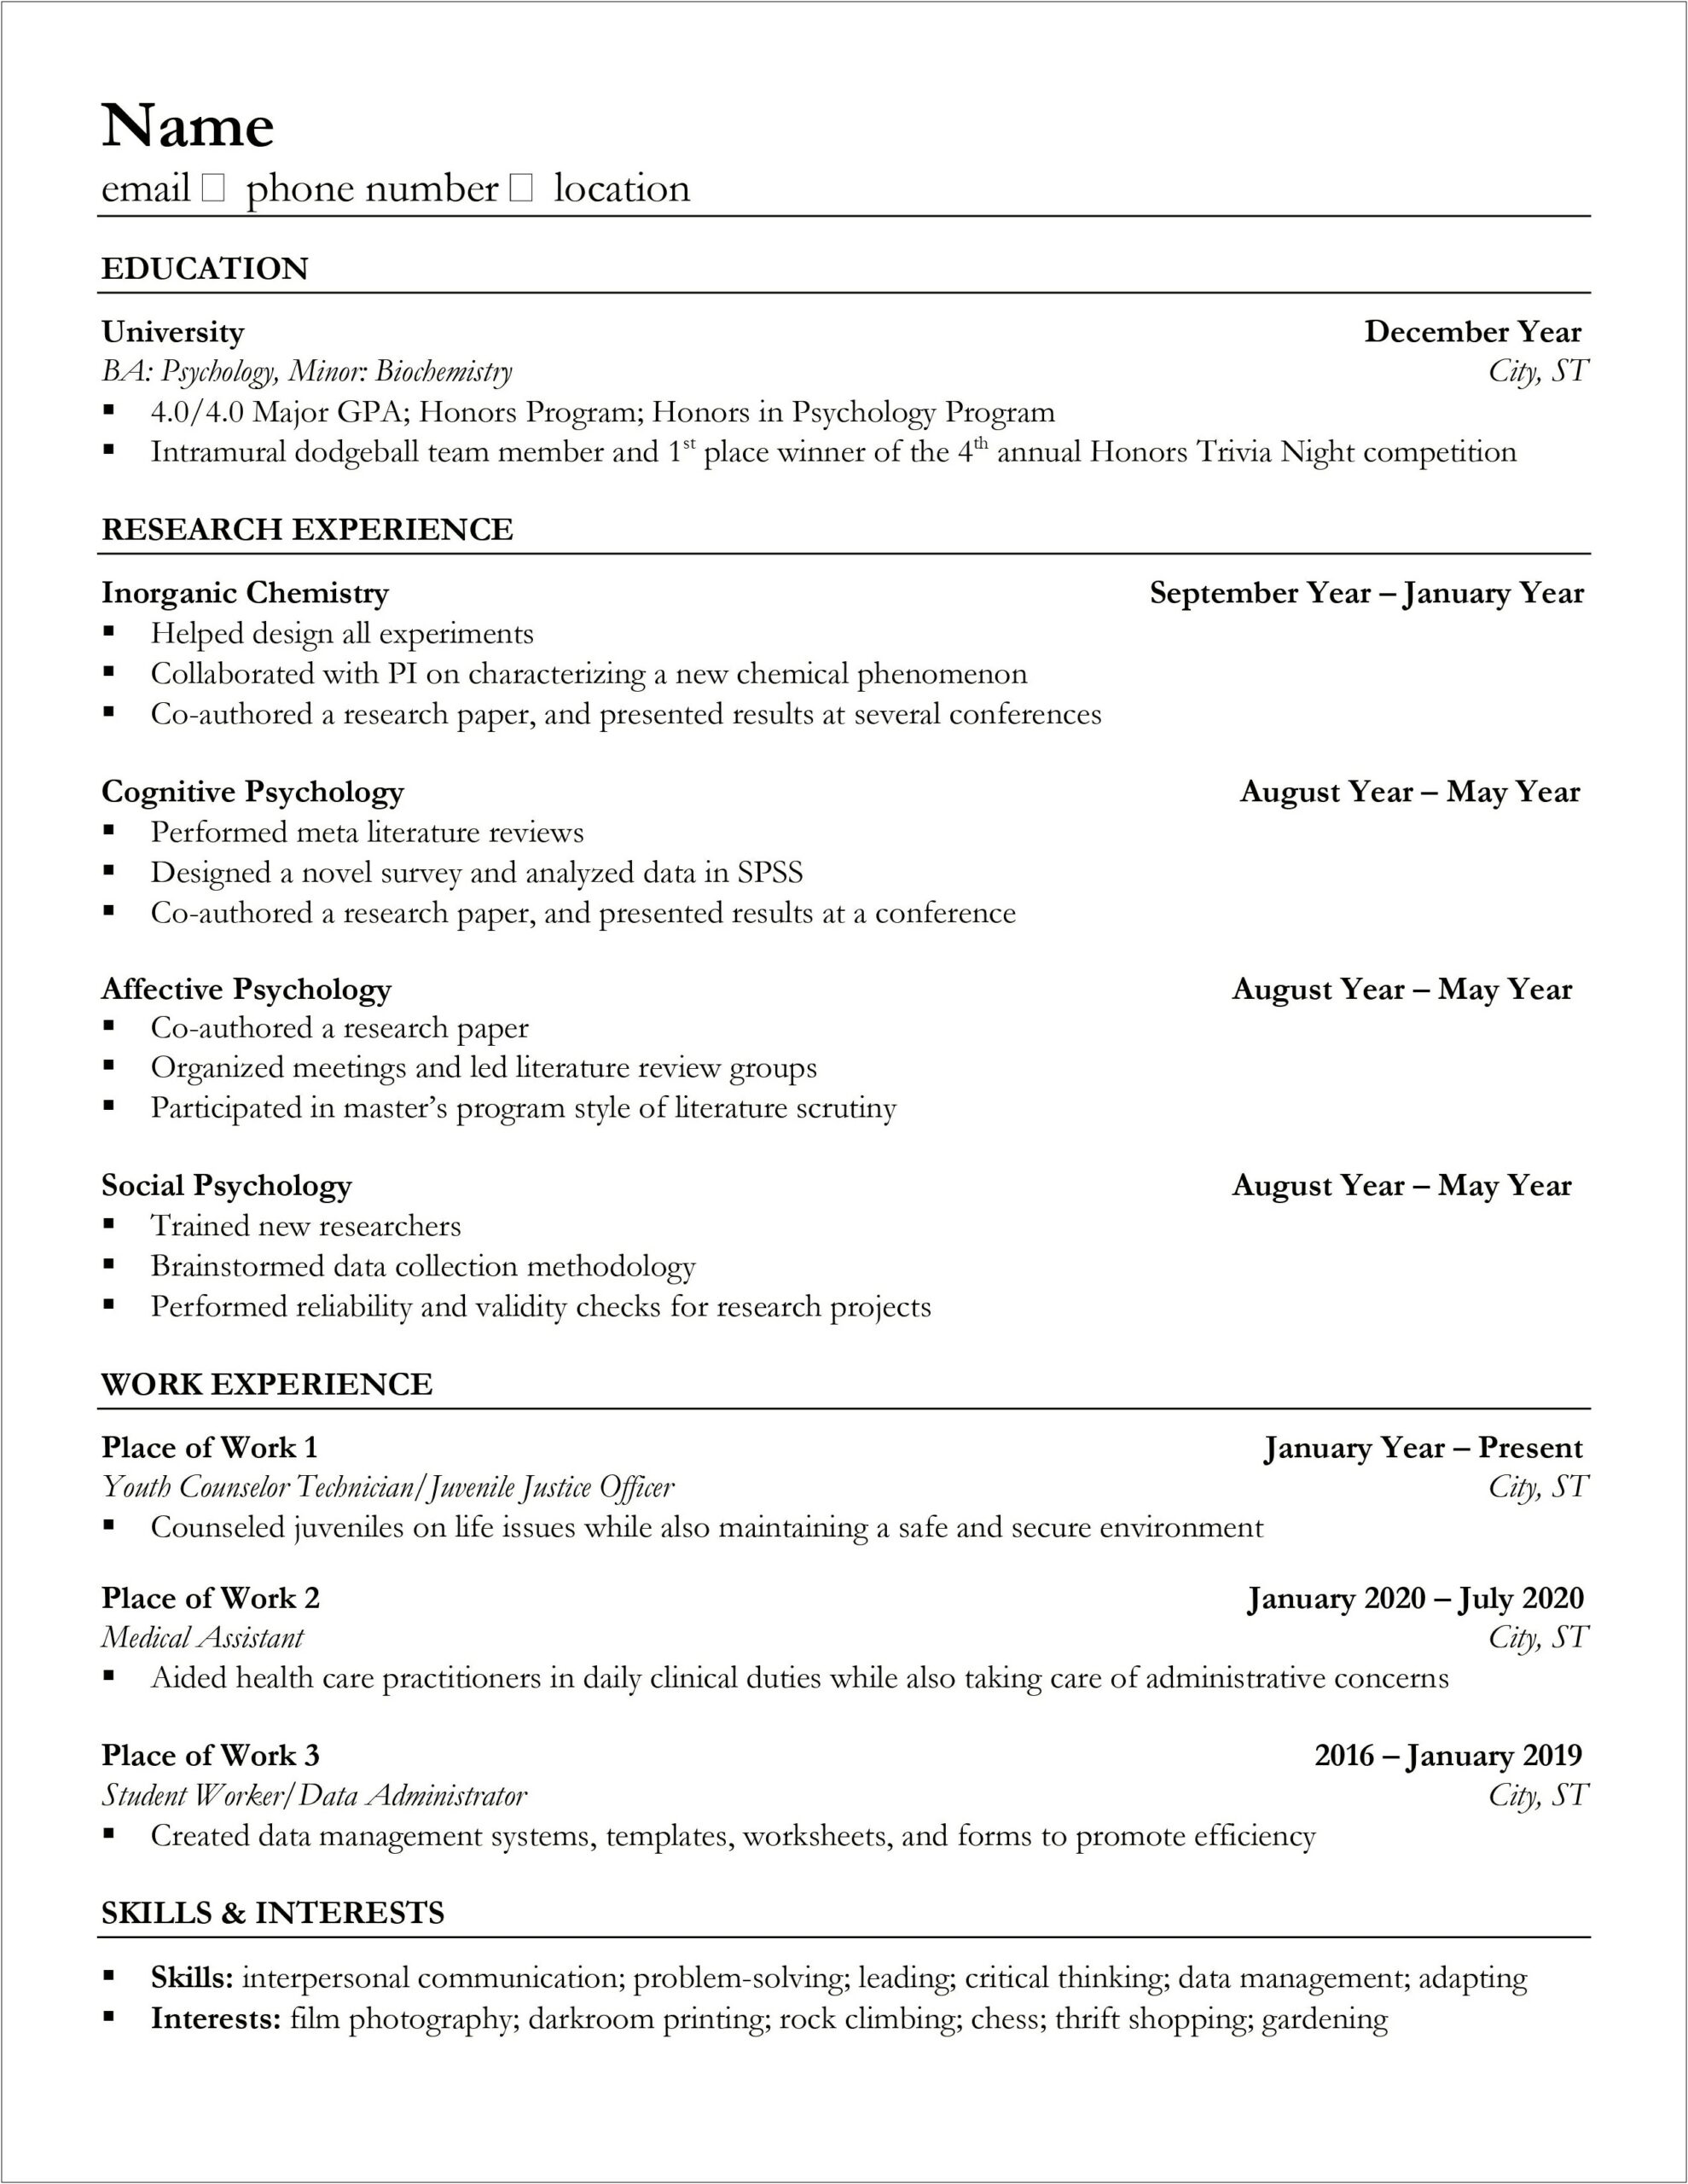 Is It Good To Send Resume At Night